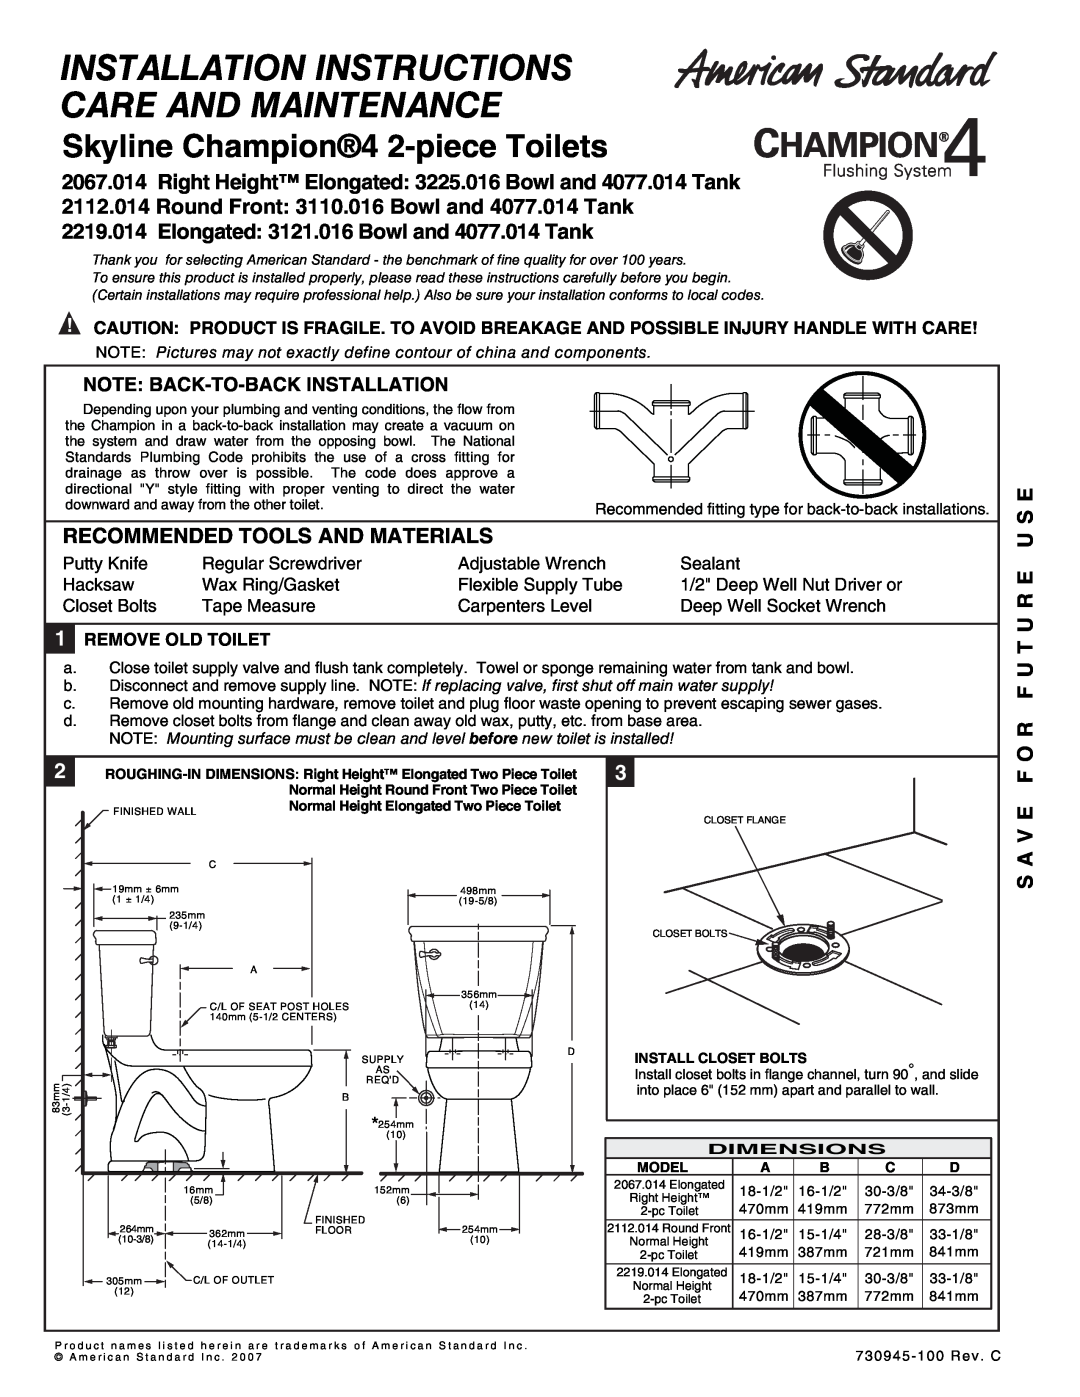 American Standard 4077.014 warranty Recommended Tools And Materials, O R F U T U R E U S E, S A V E F, 1REMOVE OLD TOILET 